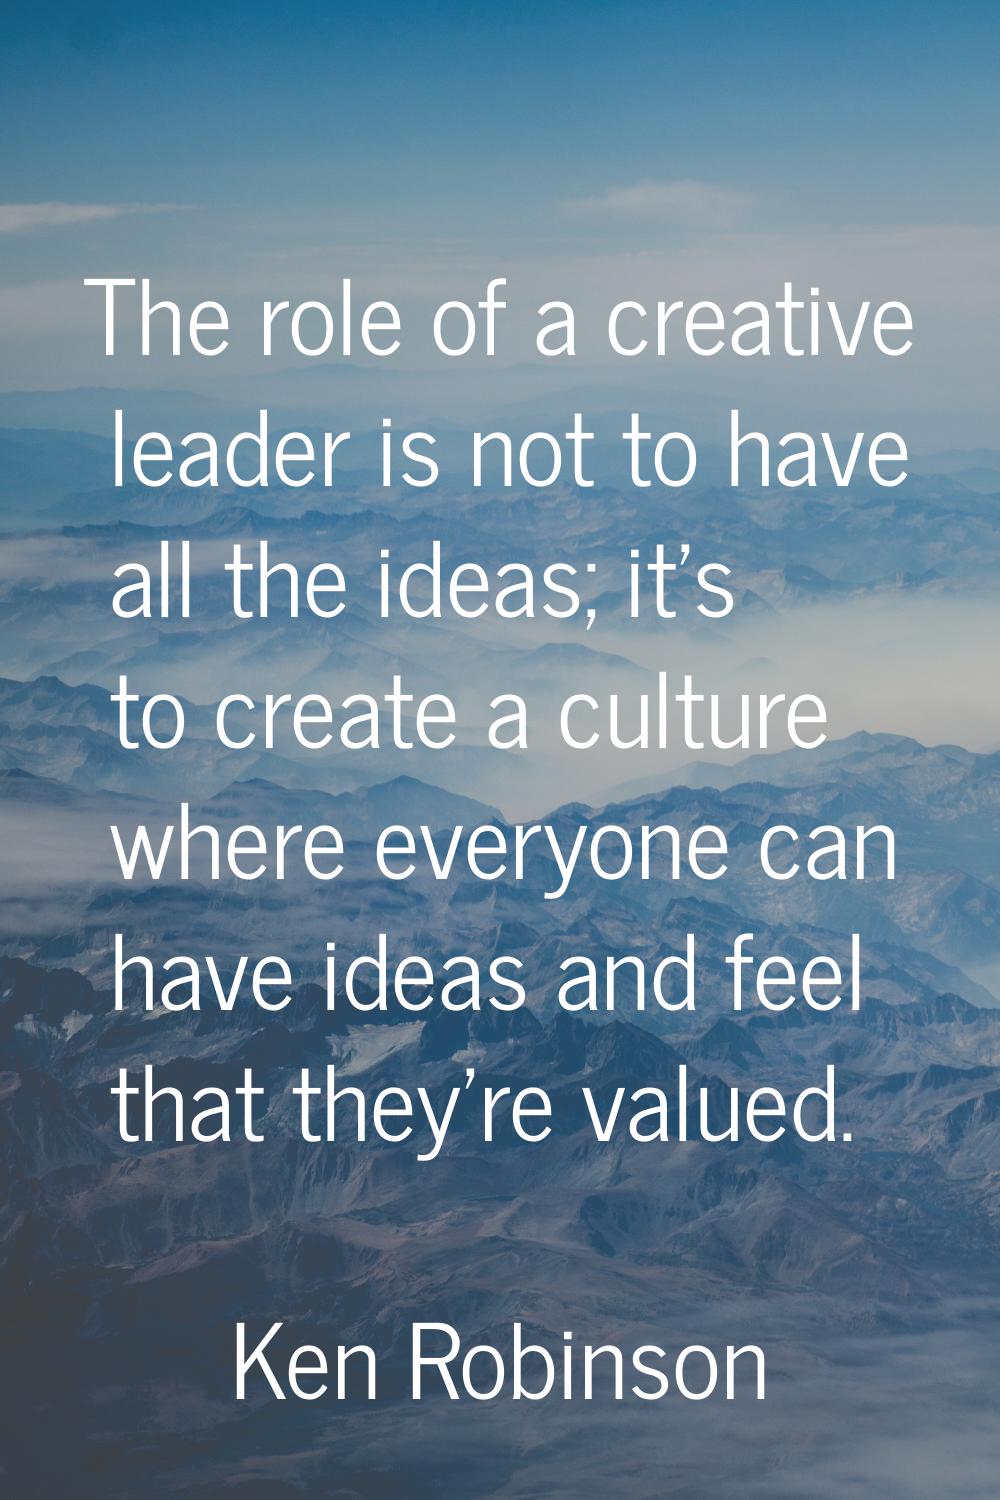 The role of a creative leader is not to have all the ideas; it's to create a culture where everyone